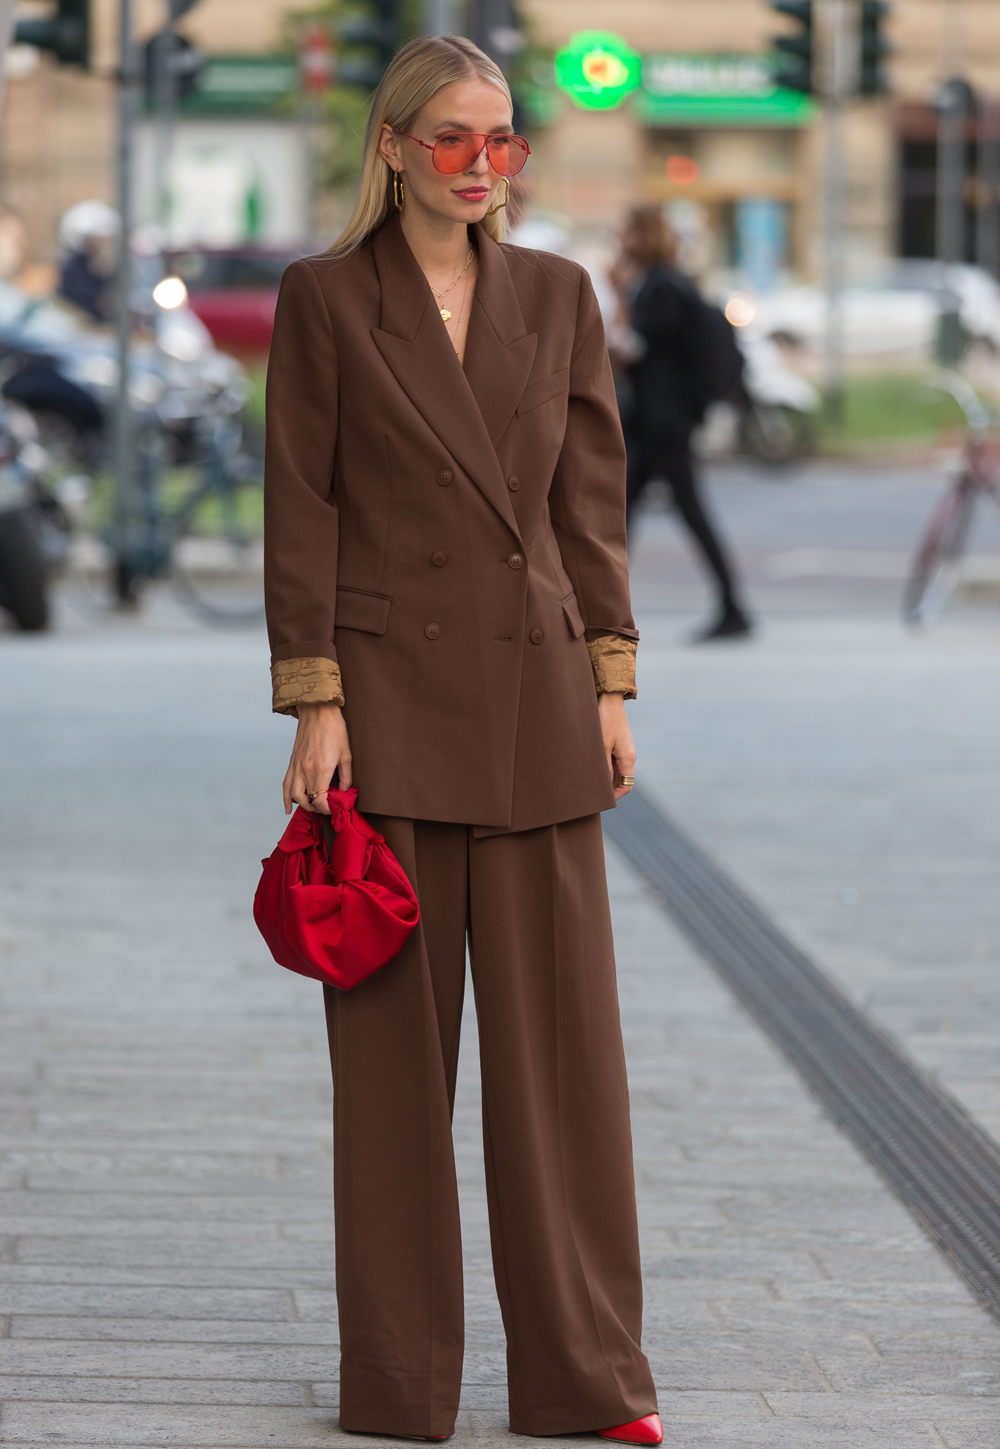 Milan Fashion Week SS 2020: All the Best Street Style | About Her